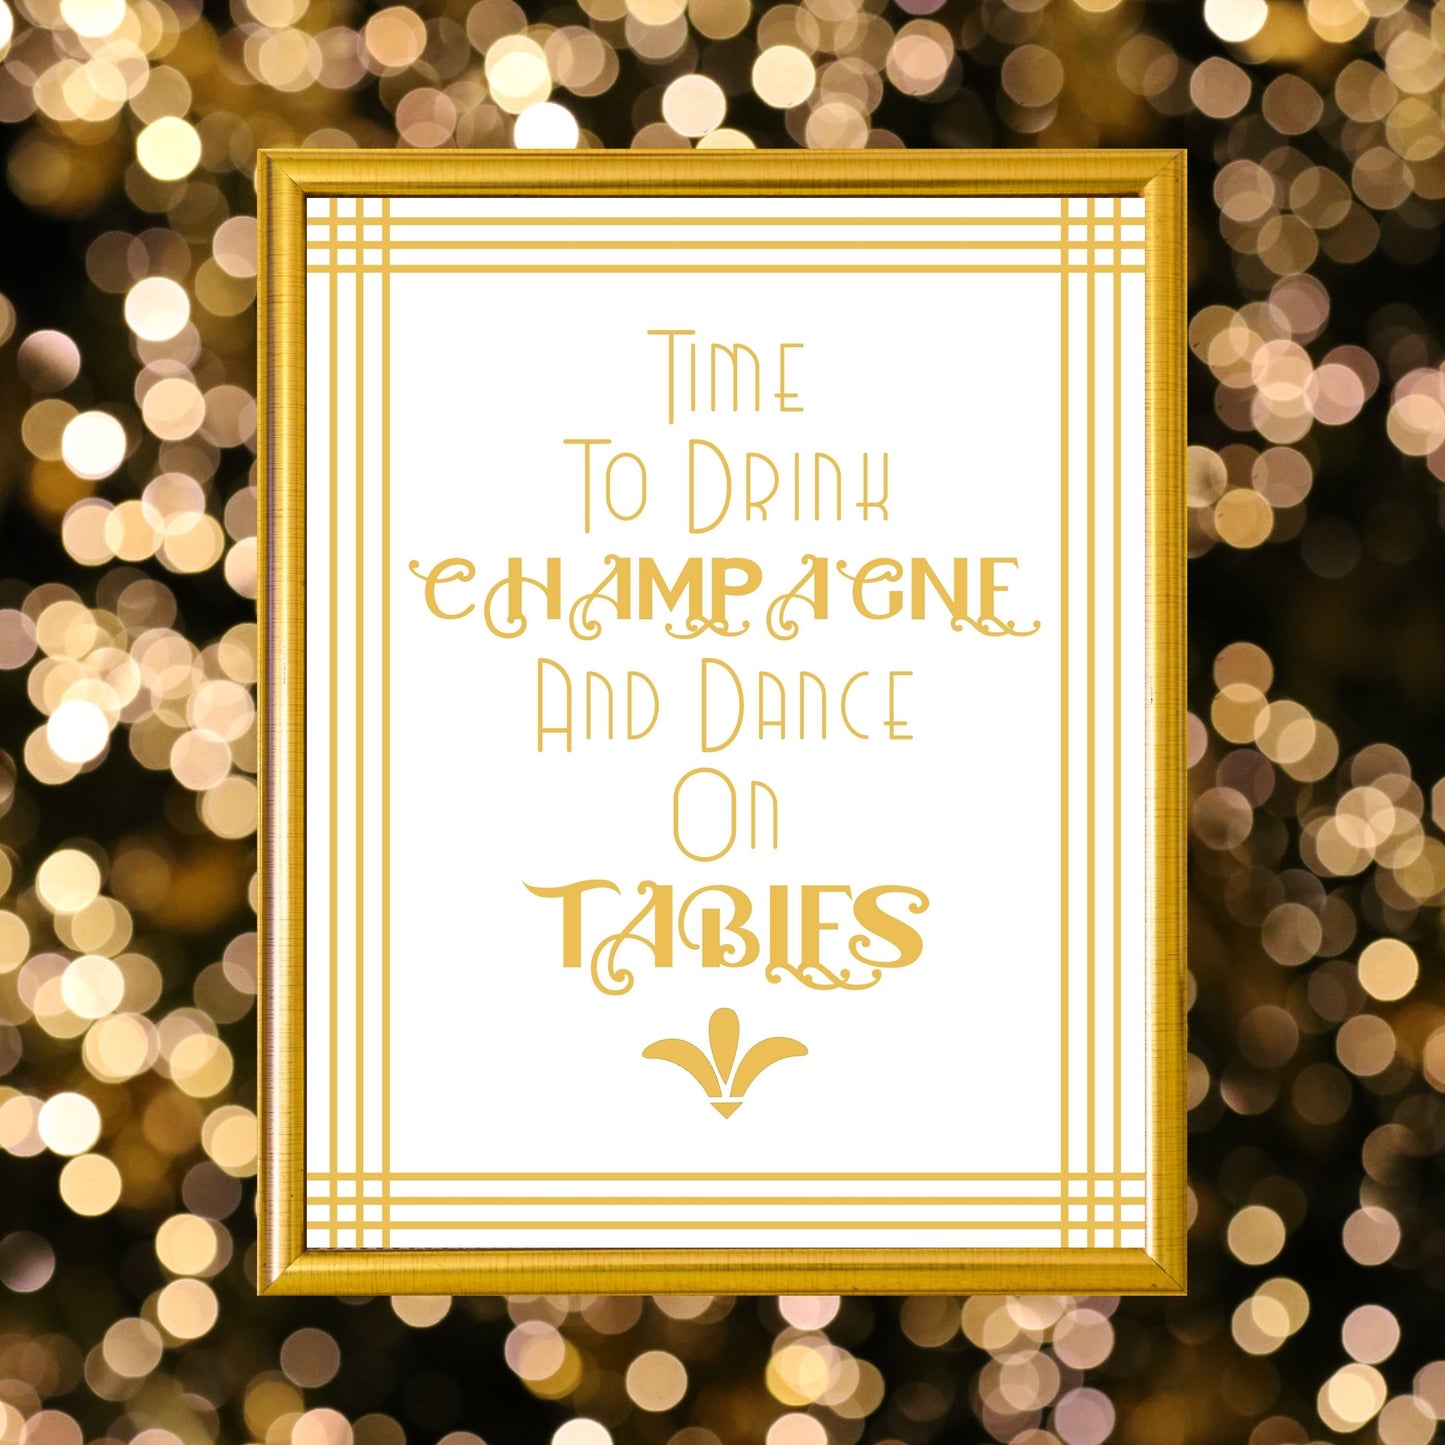 "Time To Drink Champagne And Dance On Tables" Party Sign, Great Gatsby, Roaring 20's, Printable Party Decor